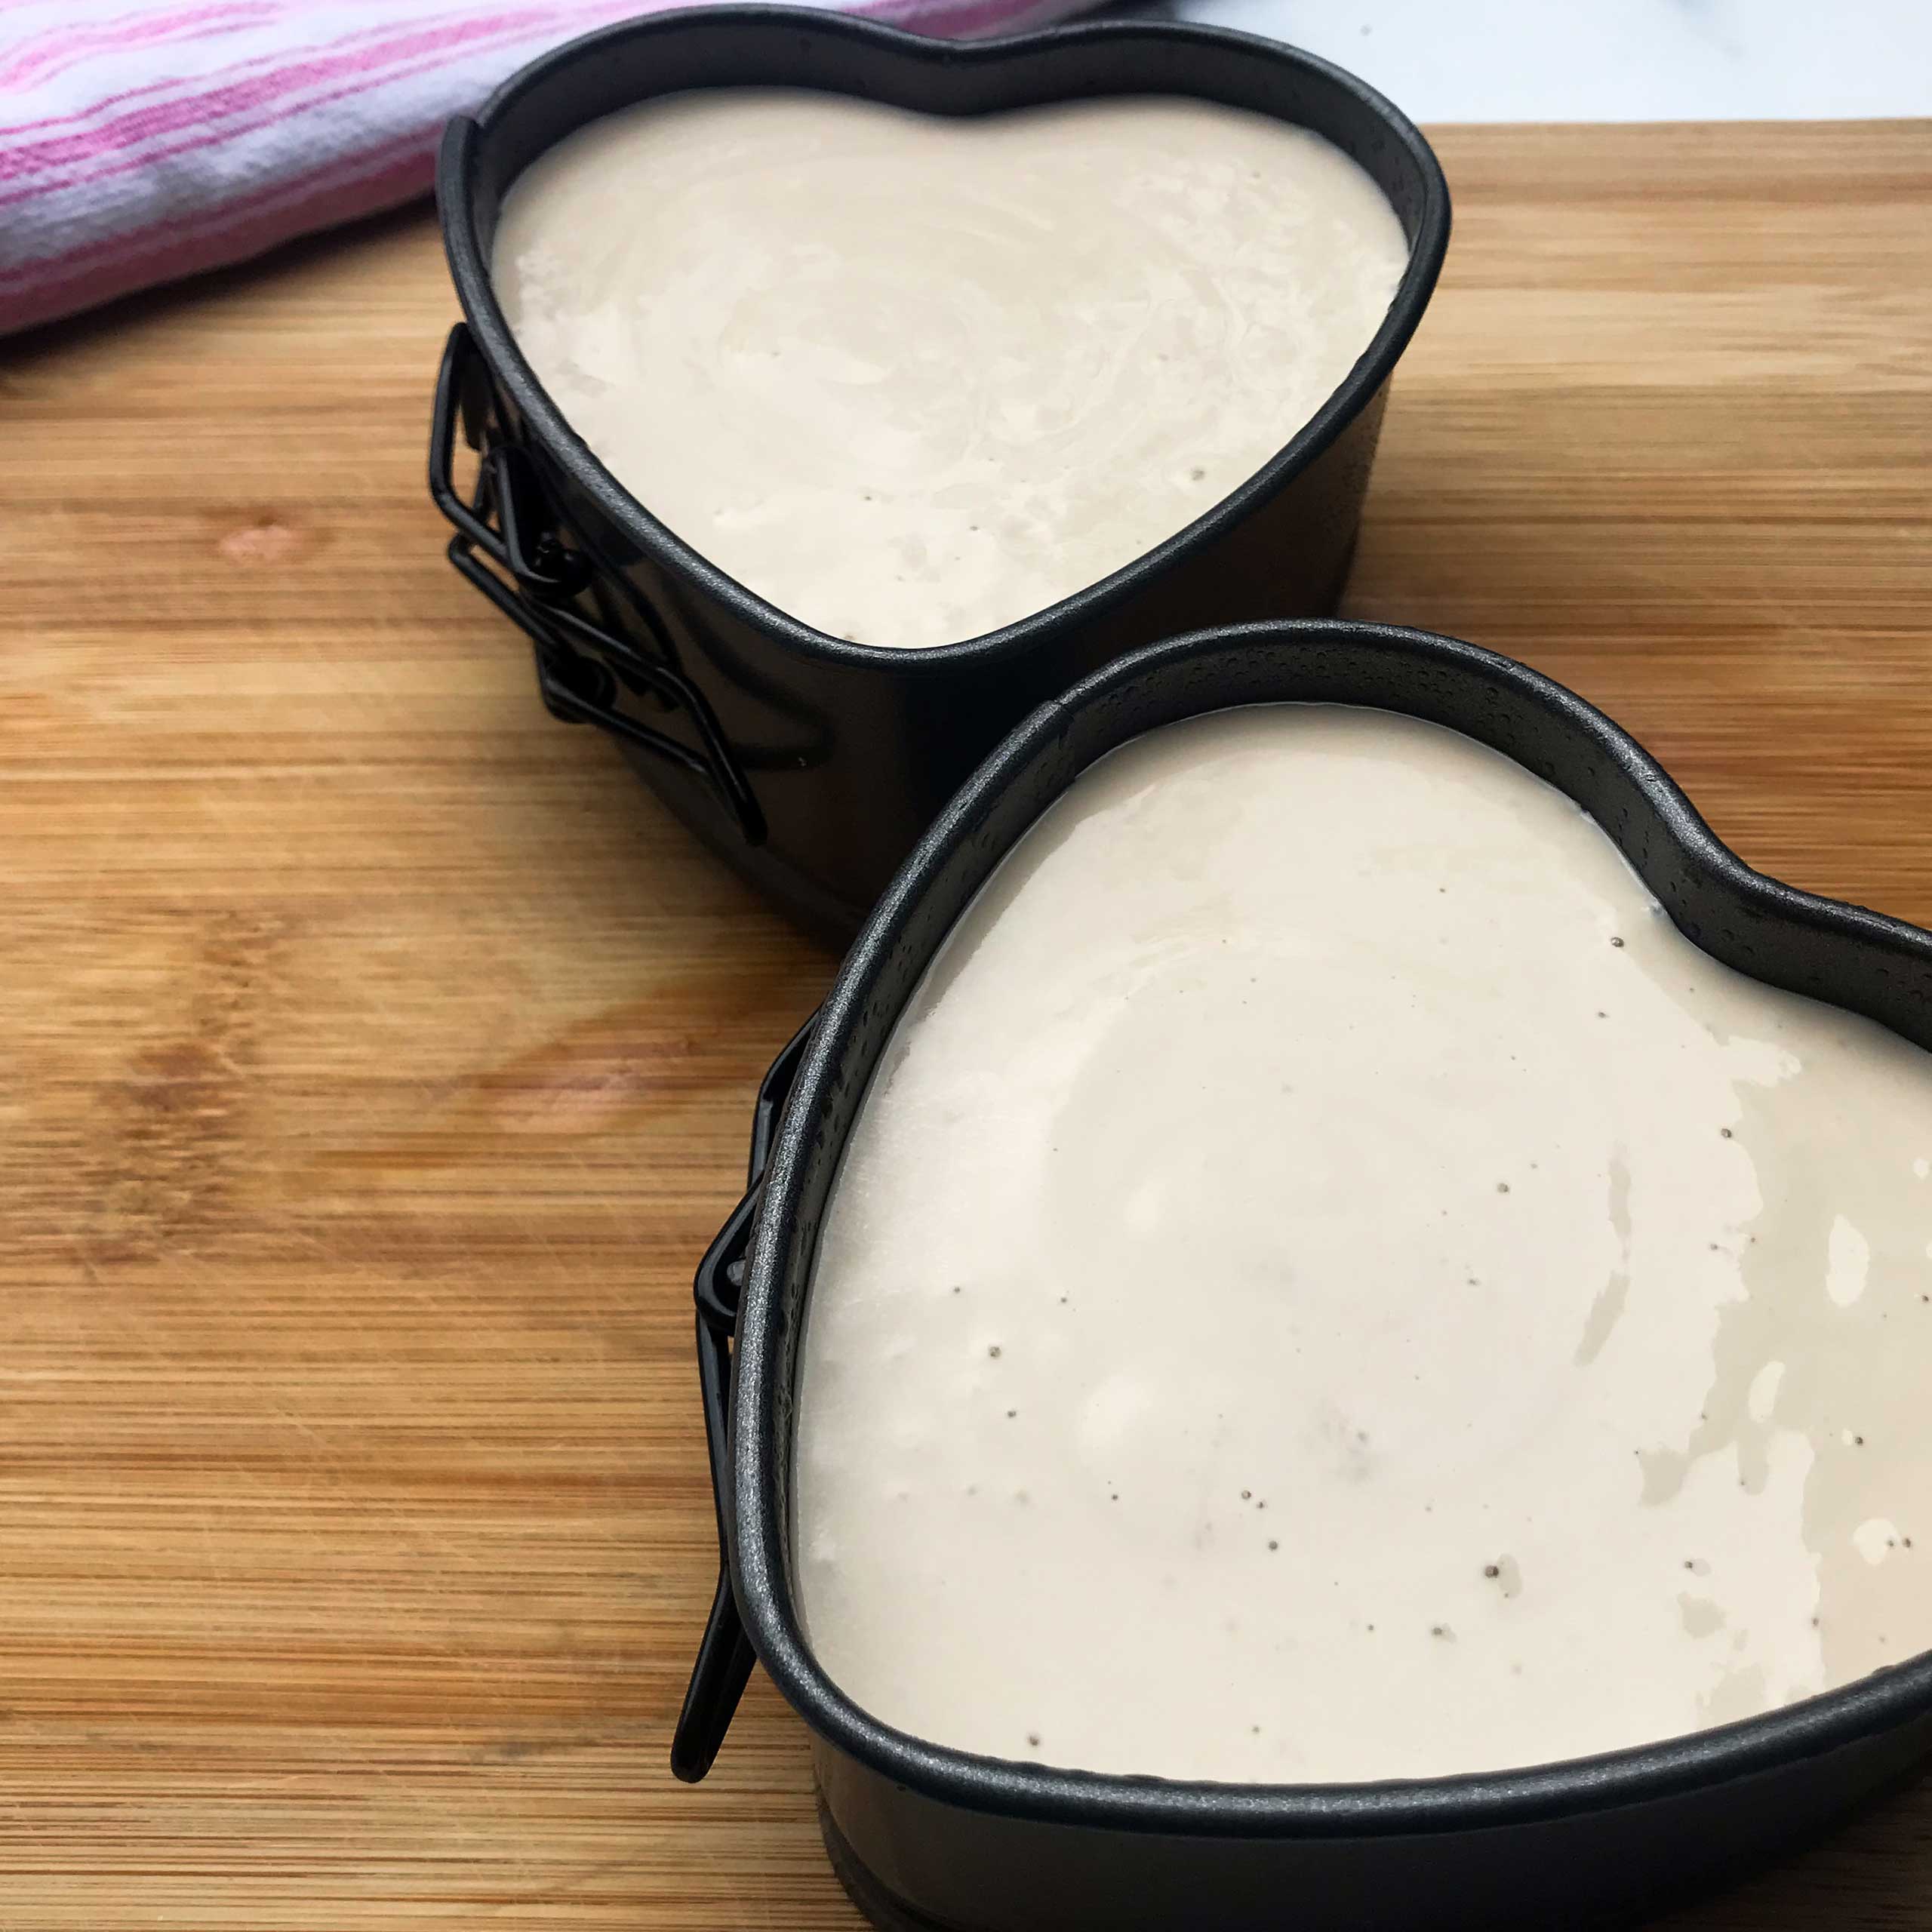 two cheesecake pans filled with batter.